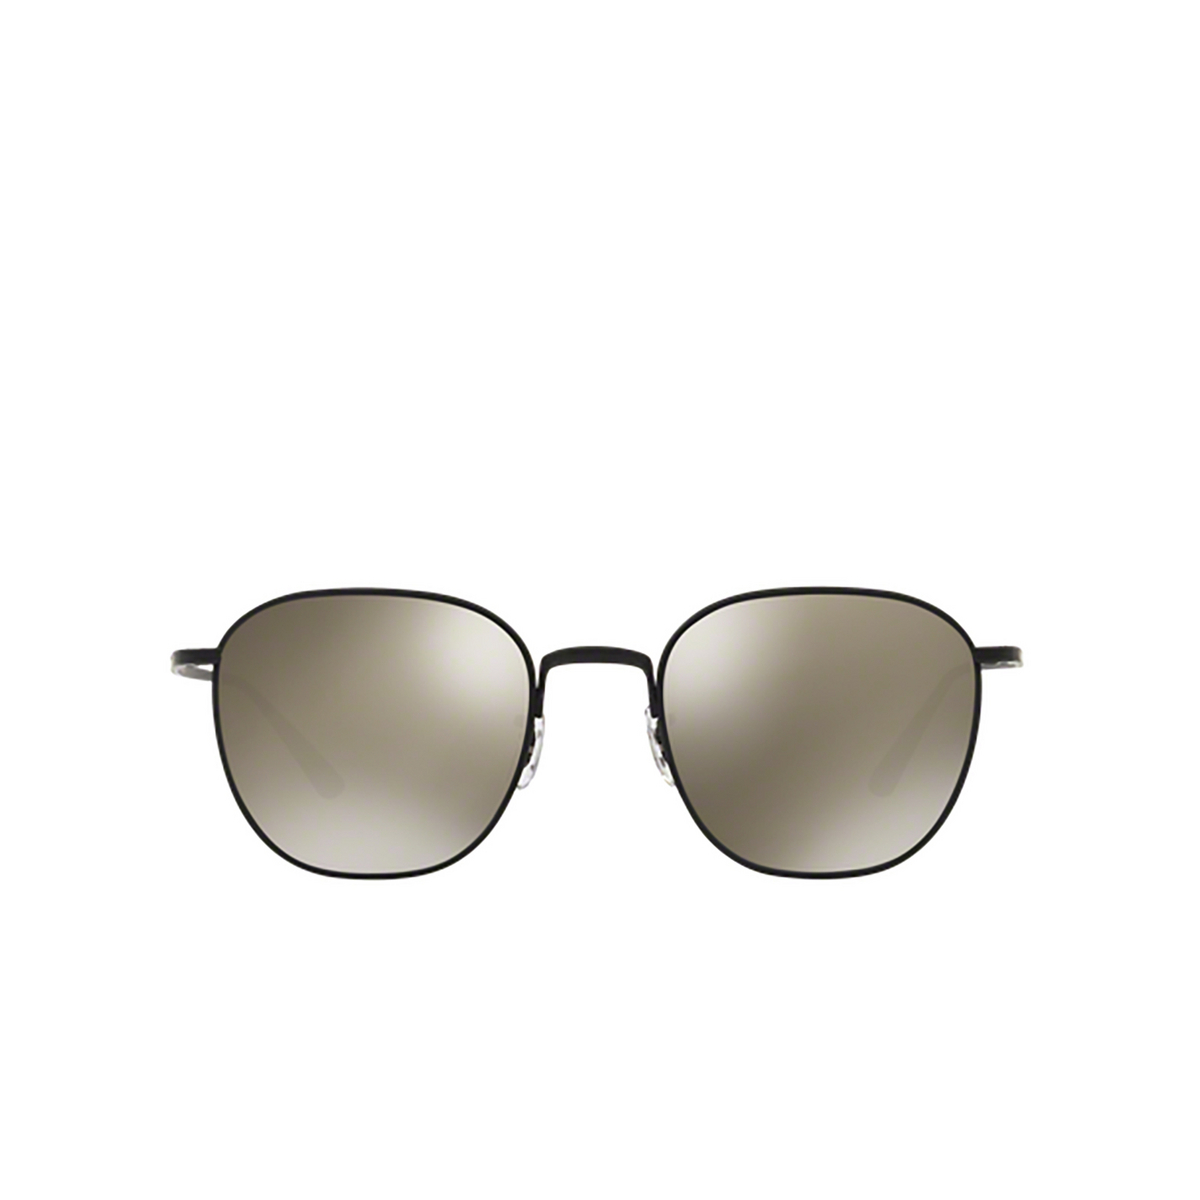 Oliver Peoples BOARD MEETING 2 Sunglasses 501739 Matte Black - front view